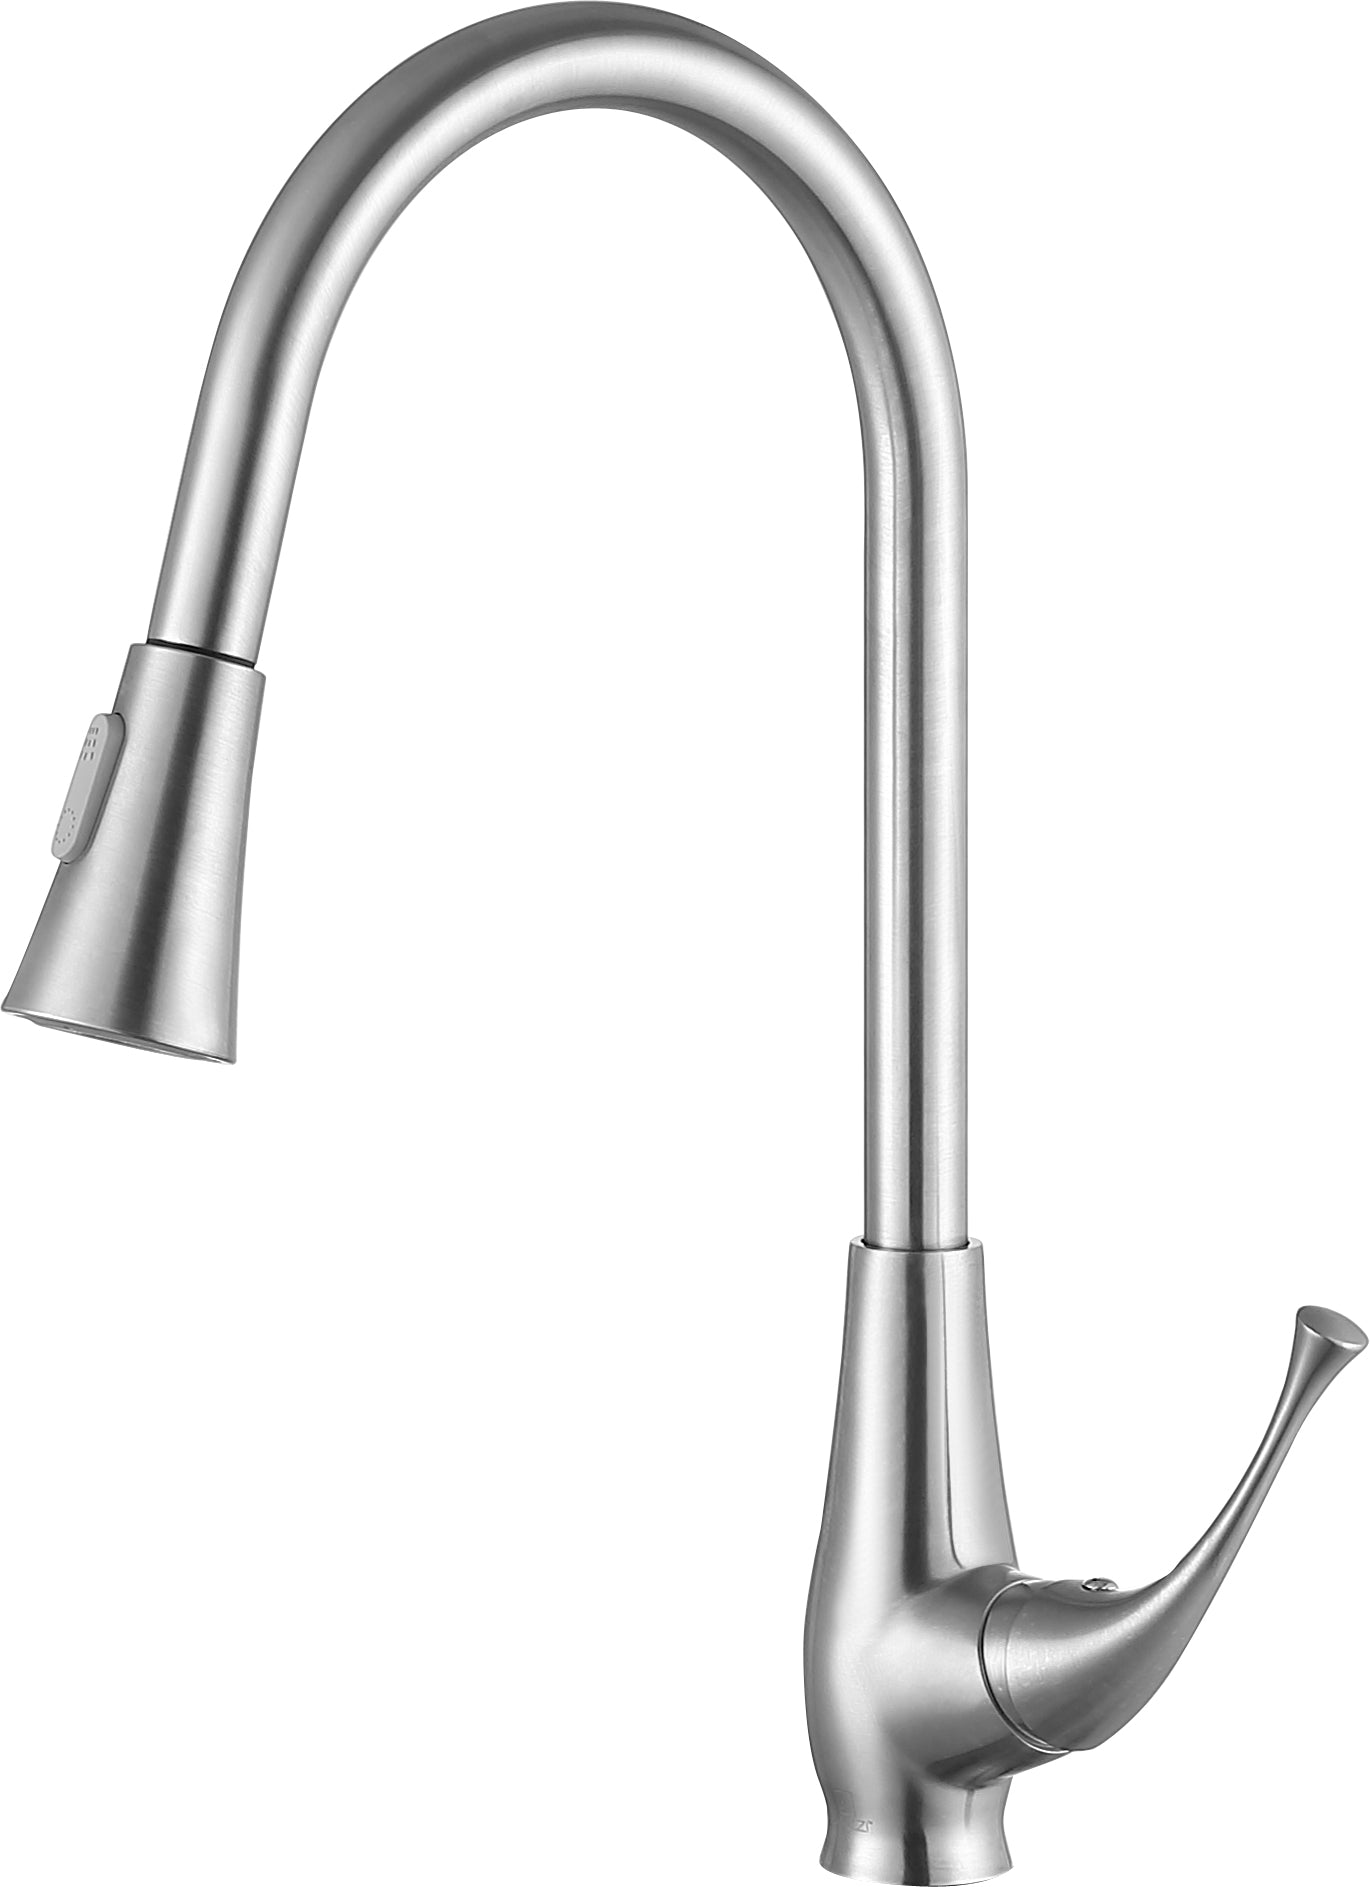 KF-AZ217BN - Meadow Single-Handle Pull-Out Sprayer Kitchen Faucet in Brushed Nickel